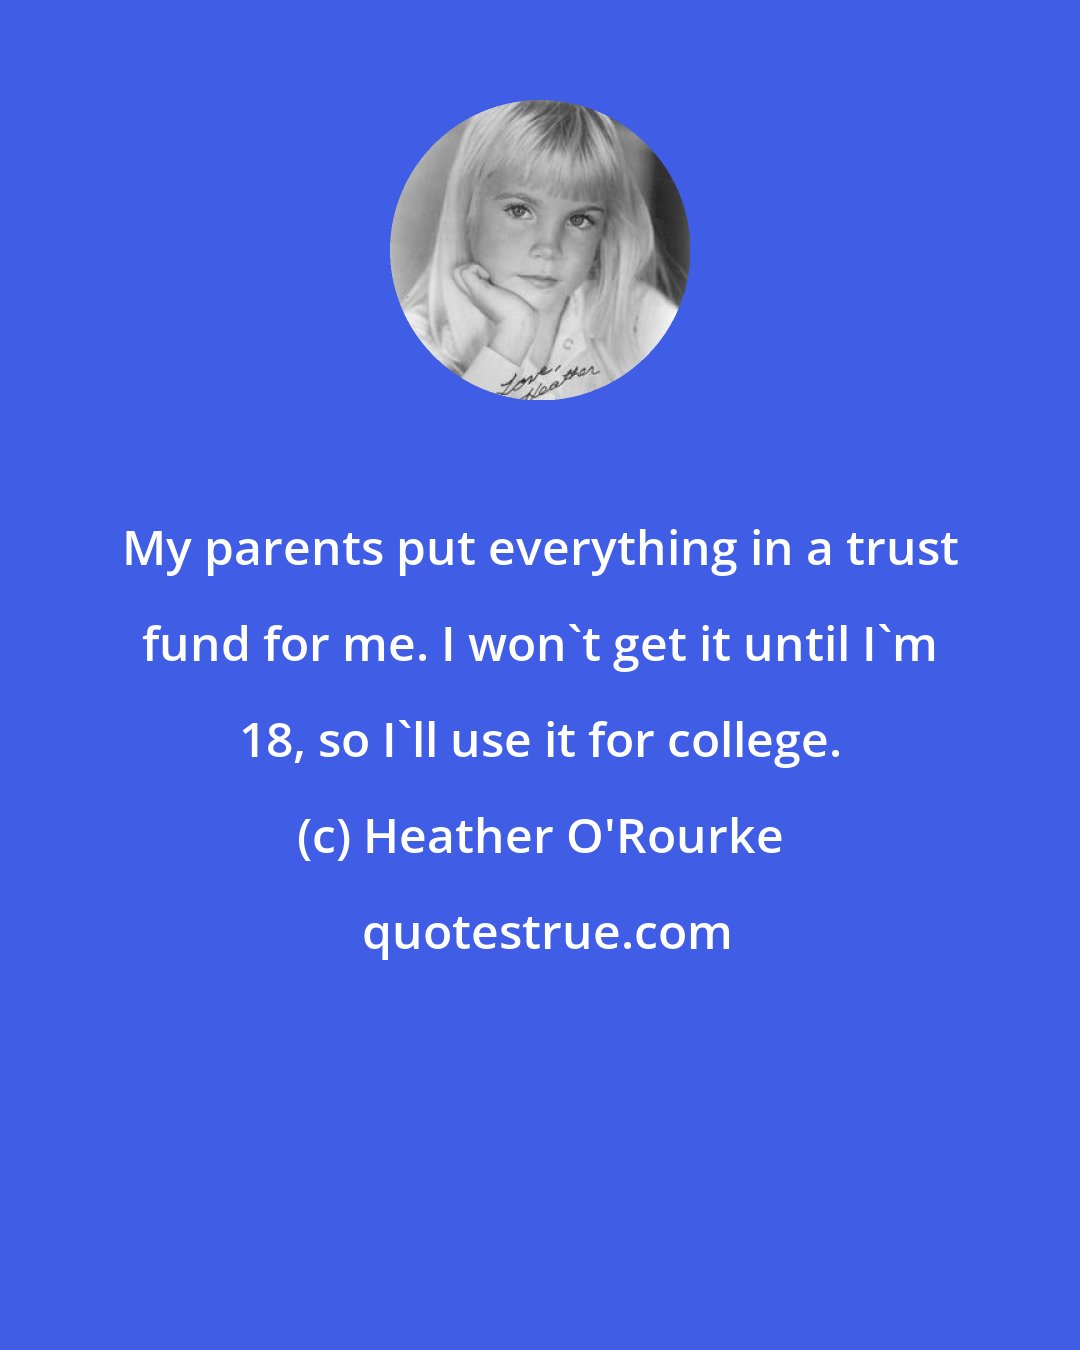 Heather O'Rourke: My parents put everything in a trust fund for me. I won't get it until I'm 18, so I'll use it for college.